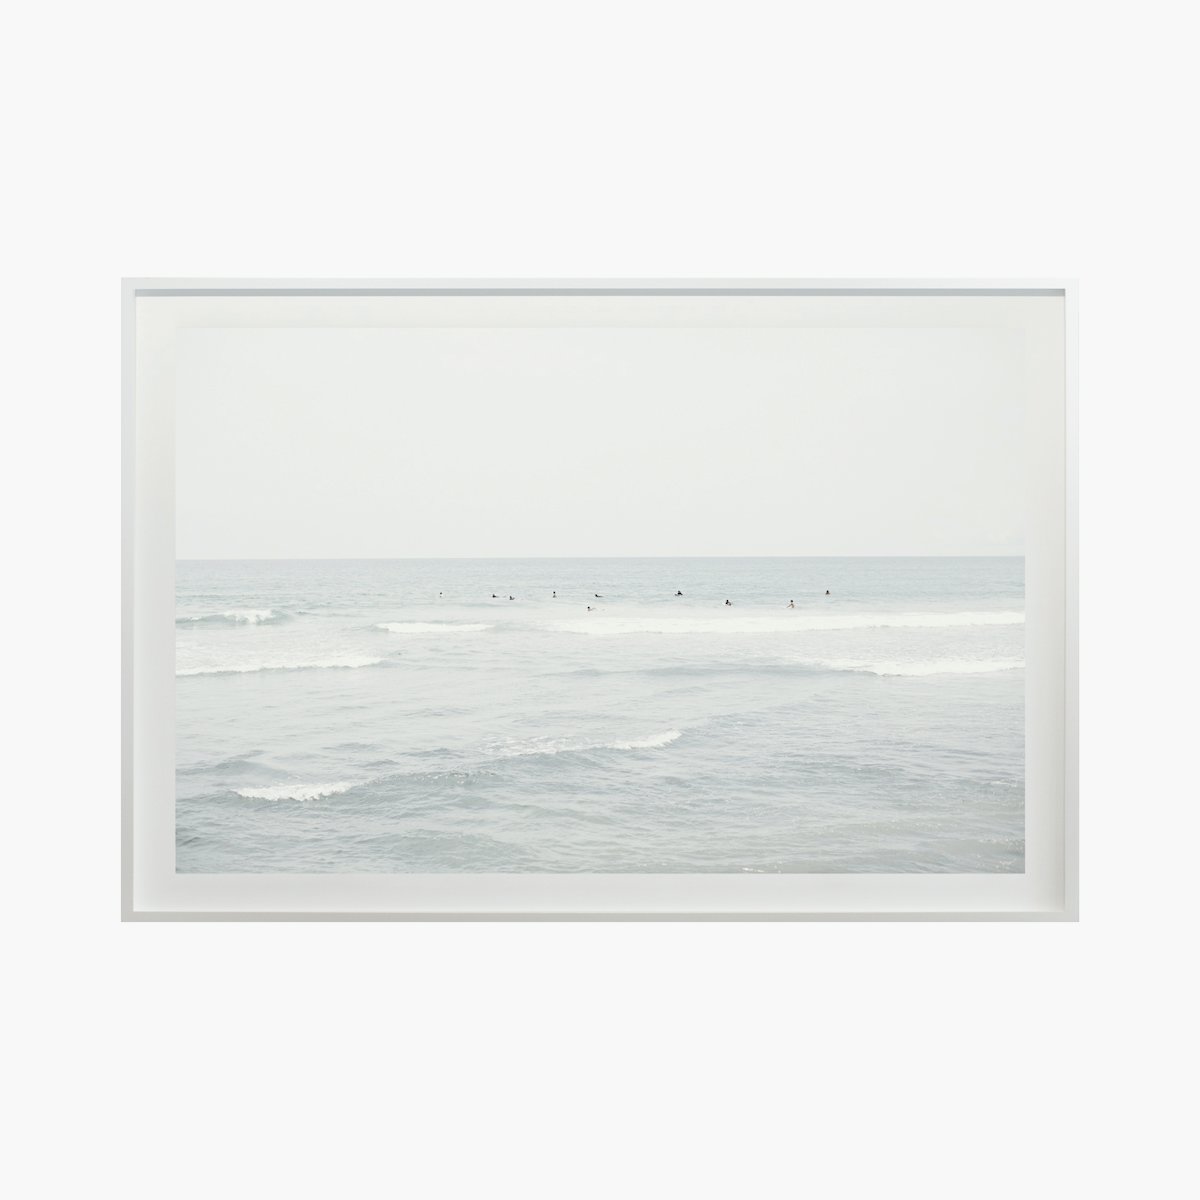 “Surf No. 8147” by Cas Friese